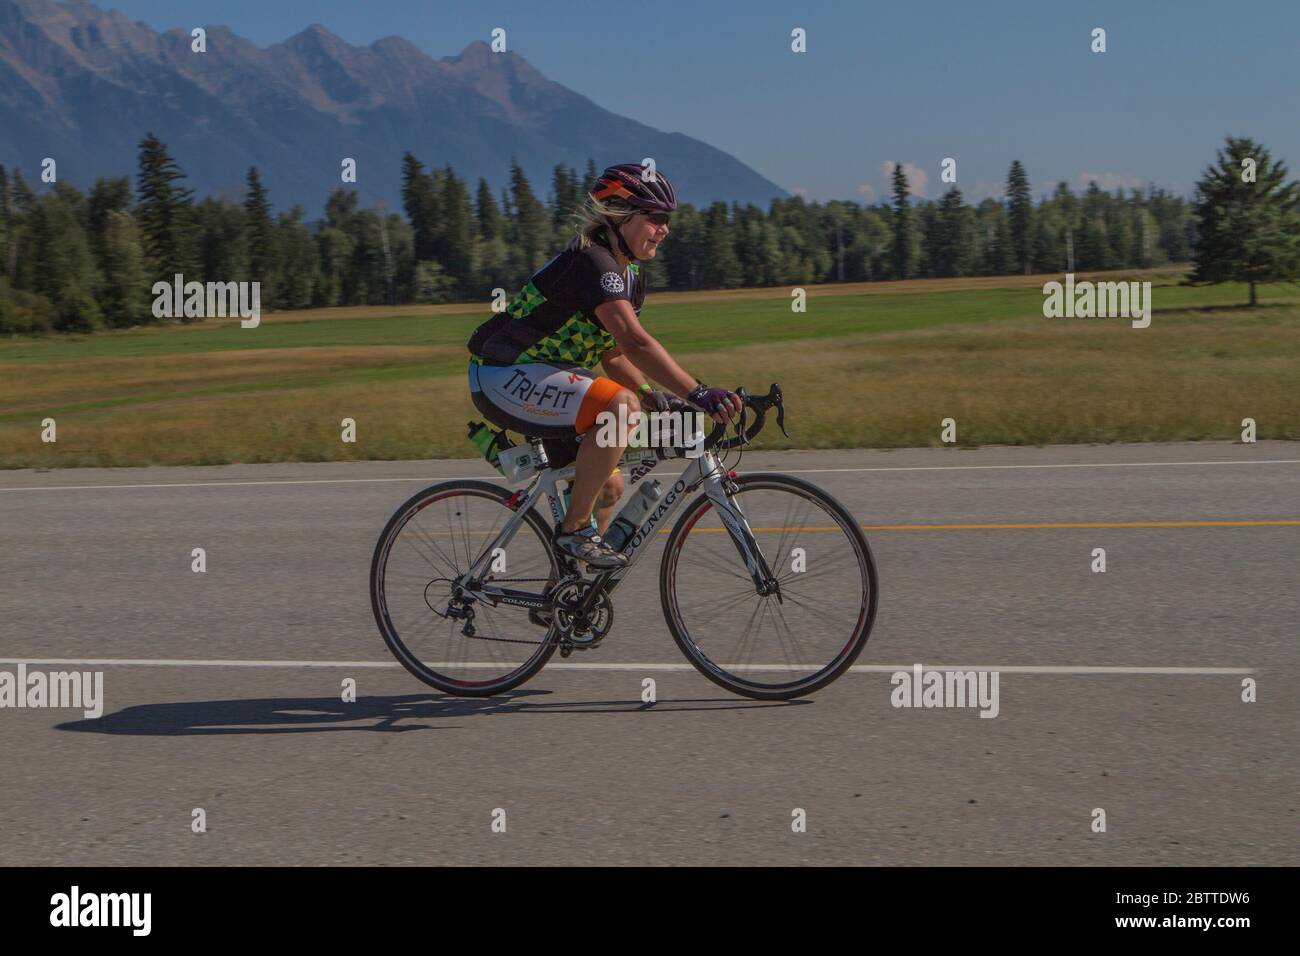 Scenic Bike Race, single rider, in full racing gear and uniform. Mountain background Stock Photo